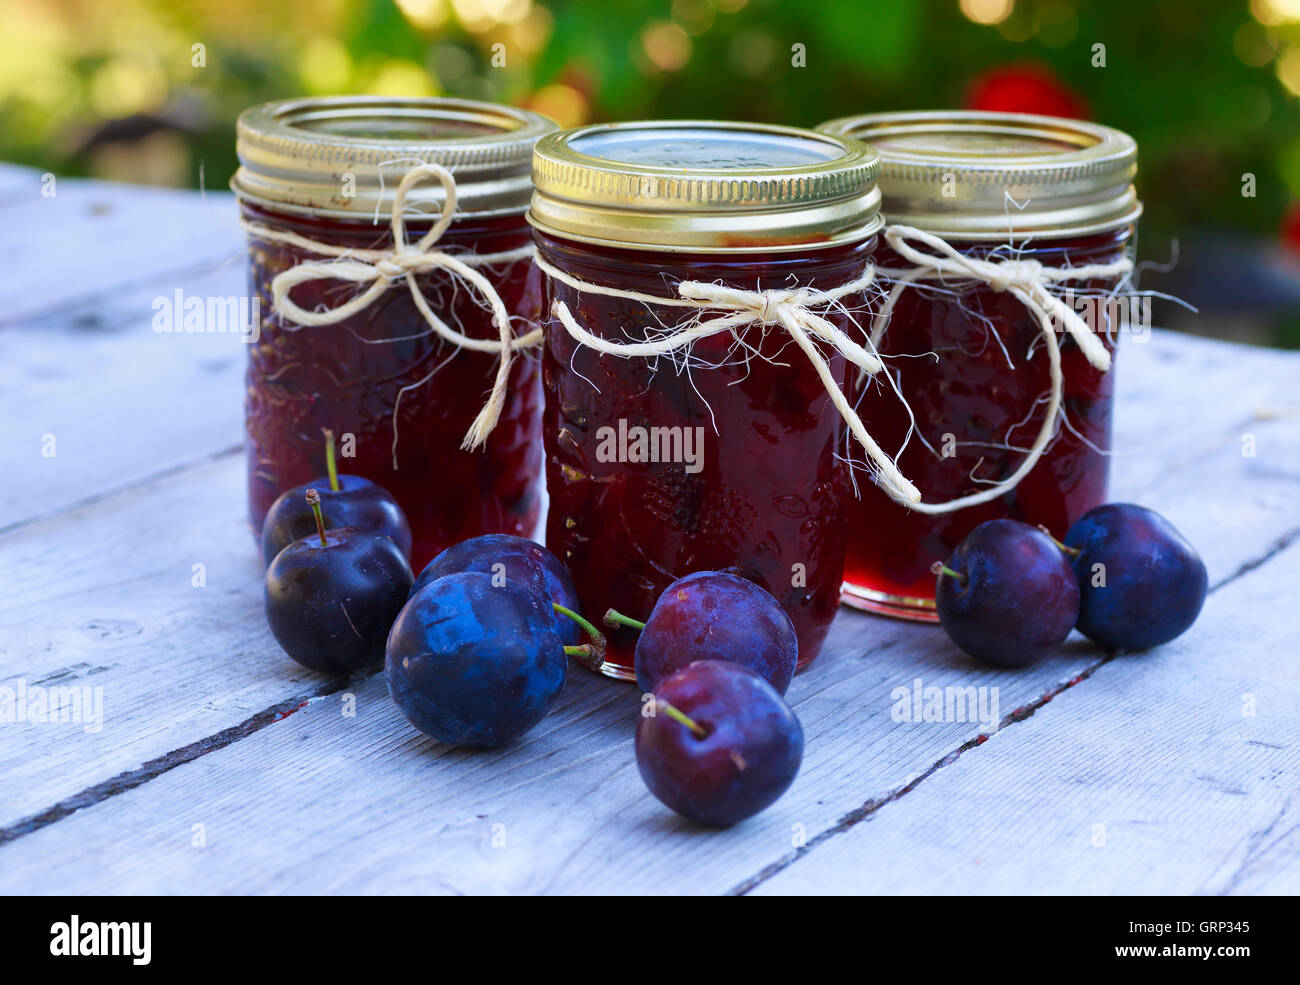 Bottles of homemade plum jam and some plums on an outside picnic table. Stock Photo